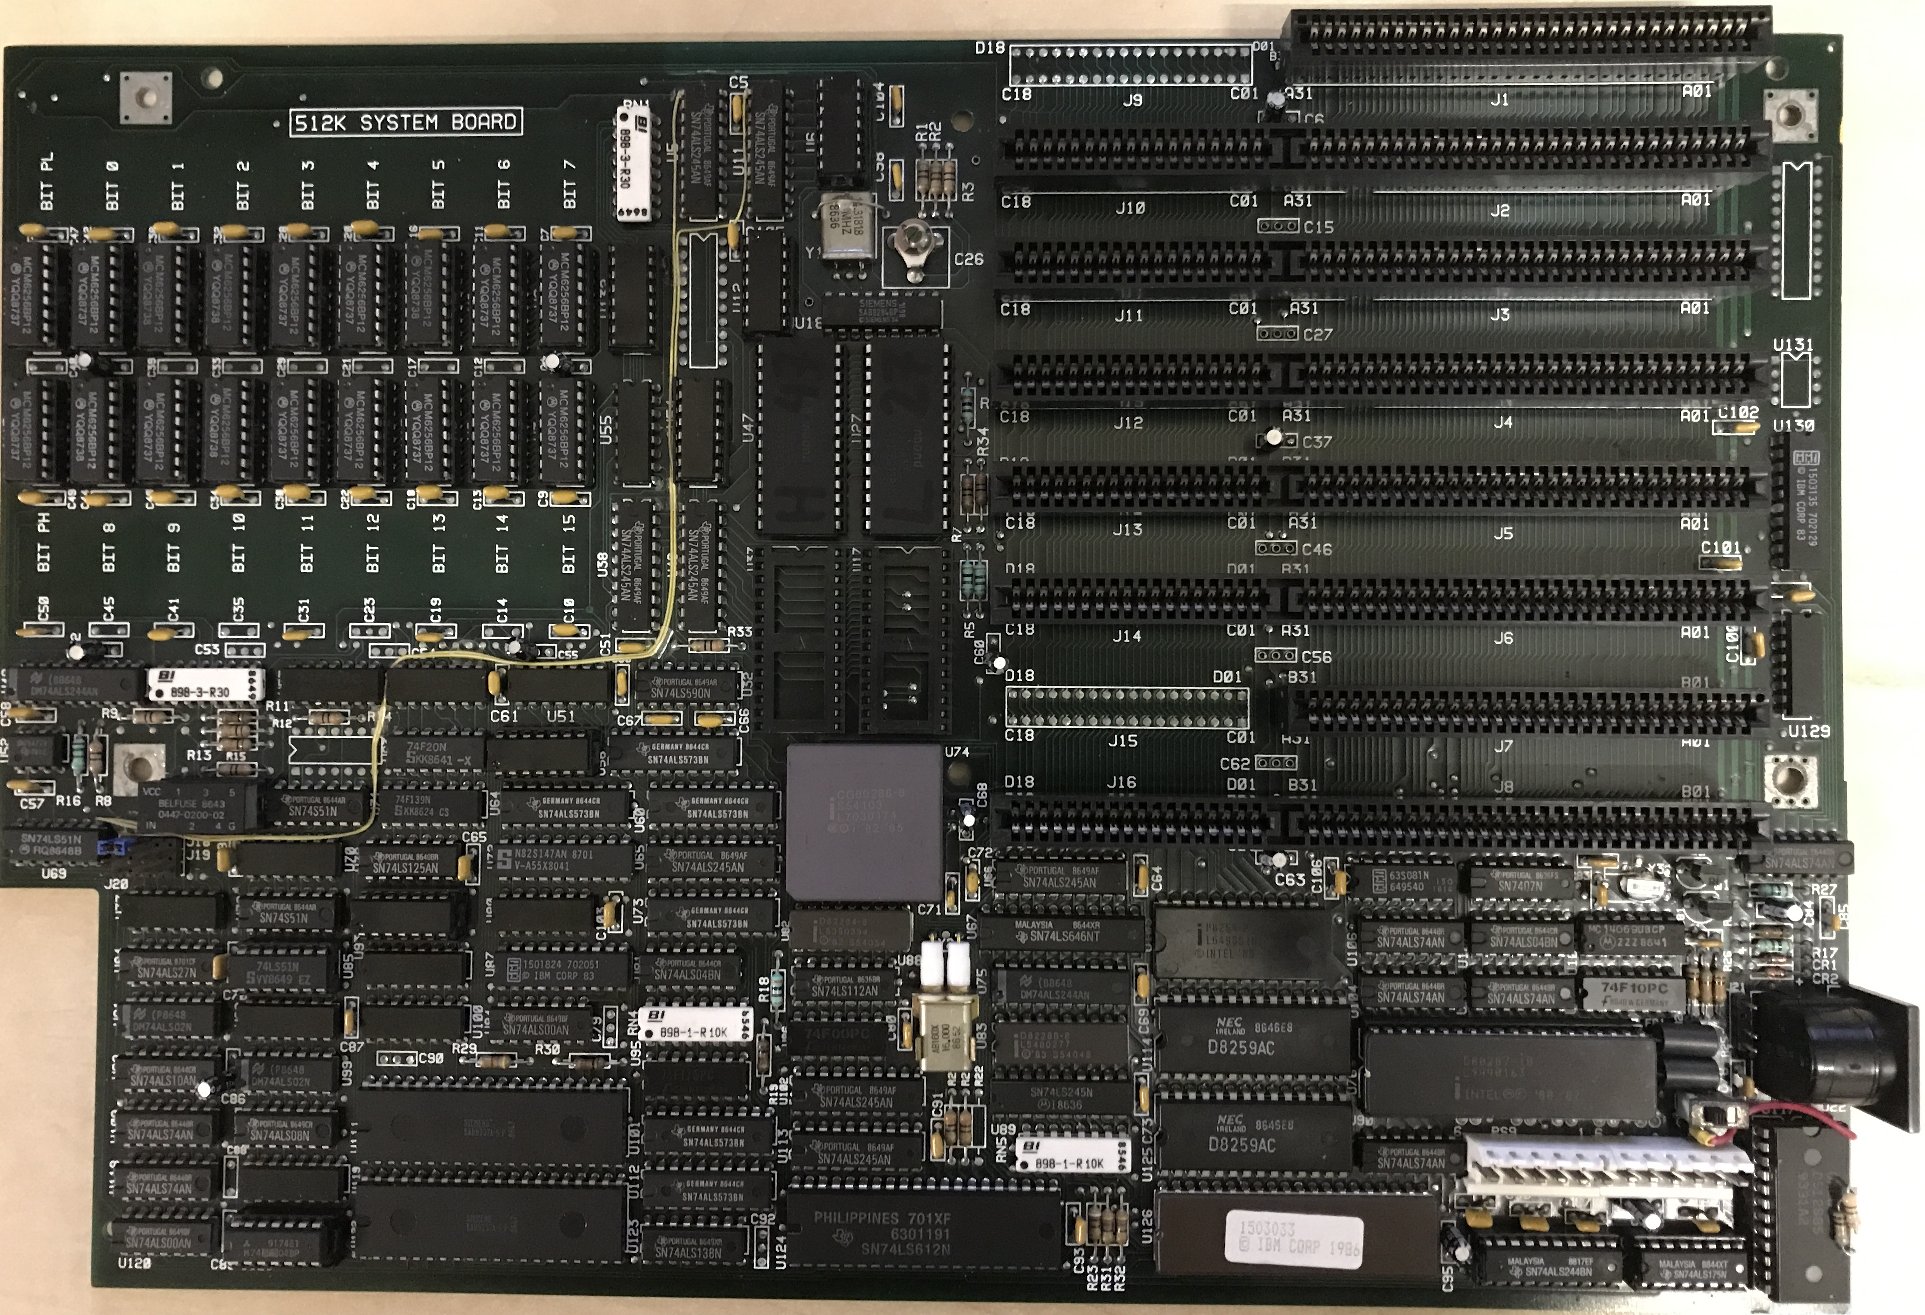 My IBM 5170 type 3 mainboard after restoration and repairs.